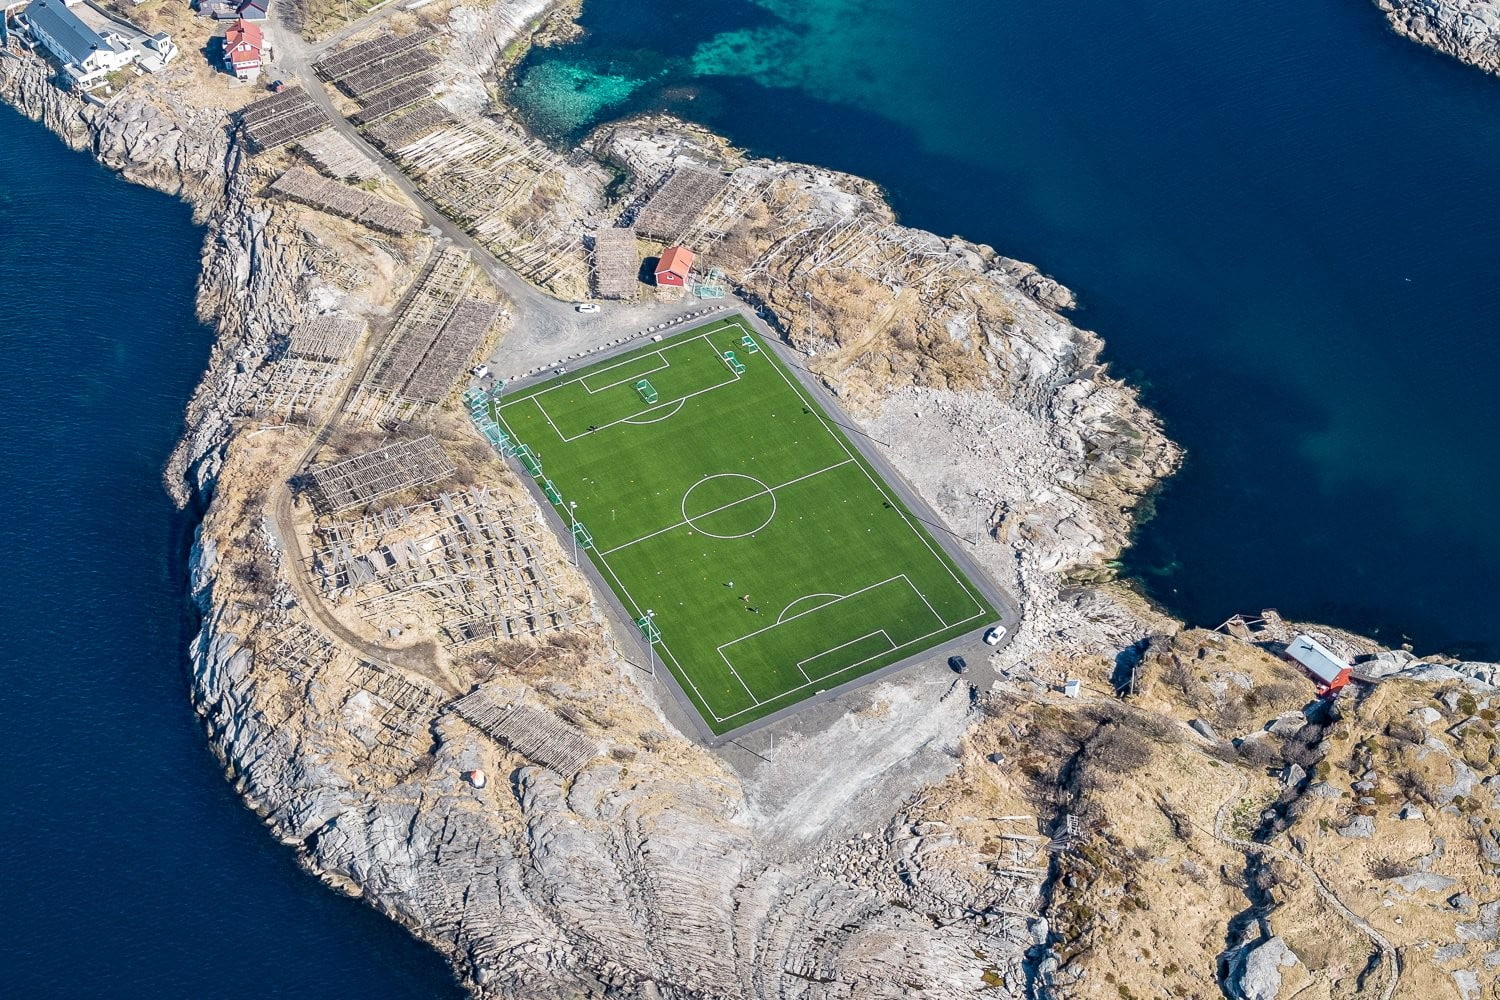 Lofoten Islands, soccer pitches, landscape, field, Norway, aerial view